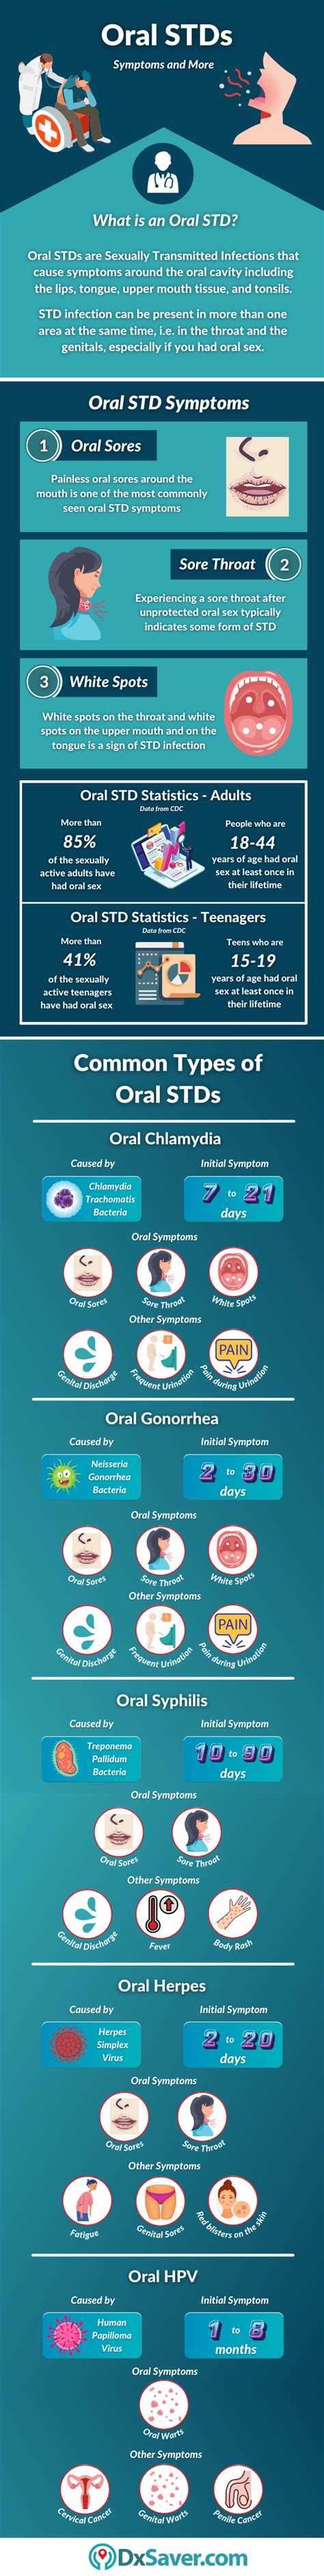 Symptoms And Causes Of Oral Std Know More On Names Of Oral Stds Treatment And Testing Cost